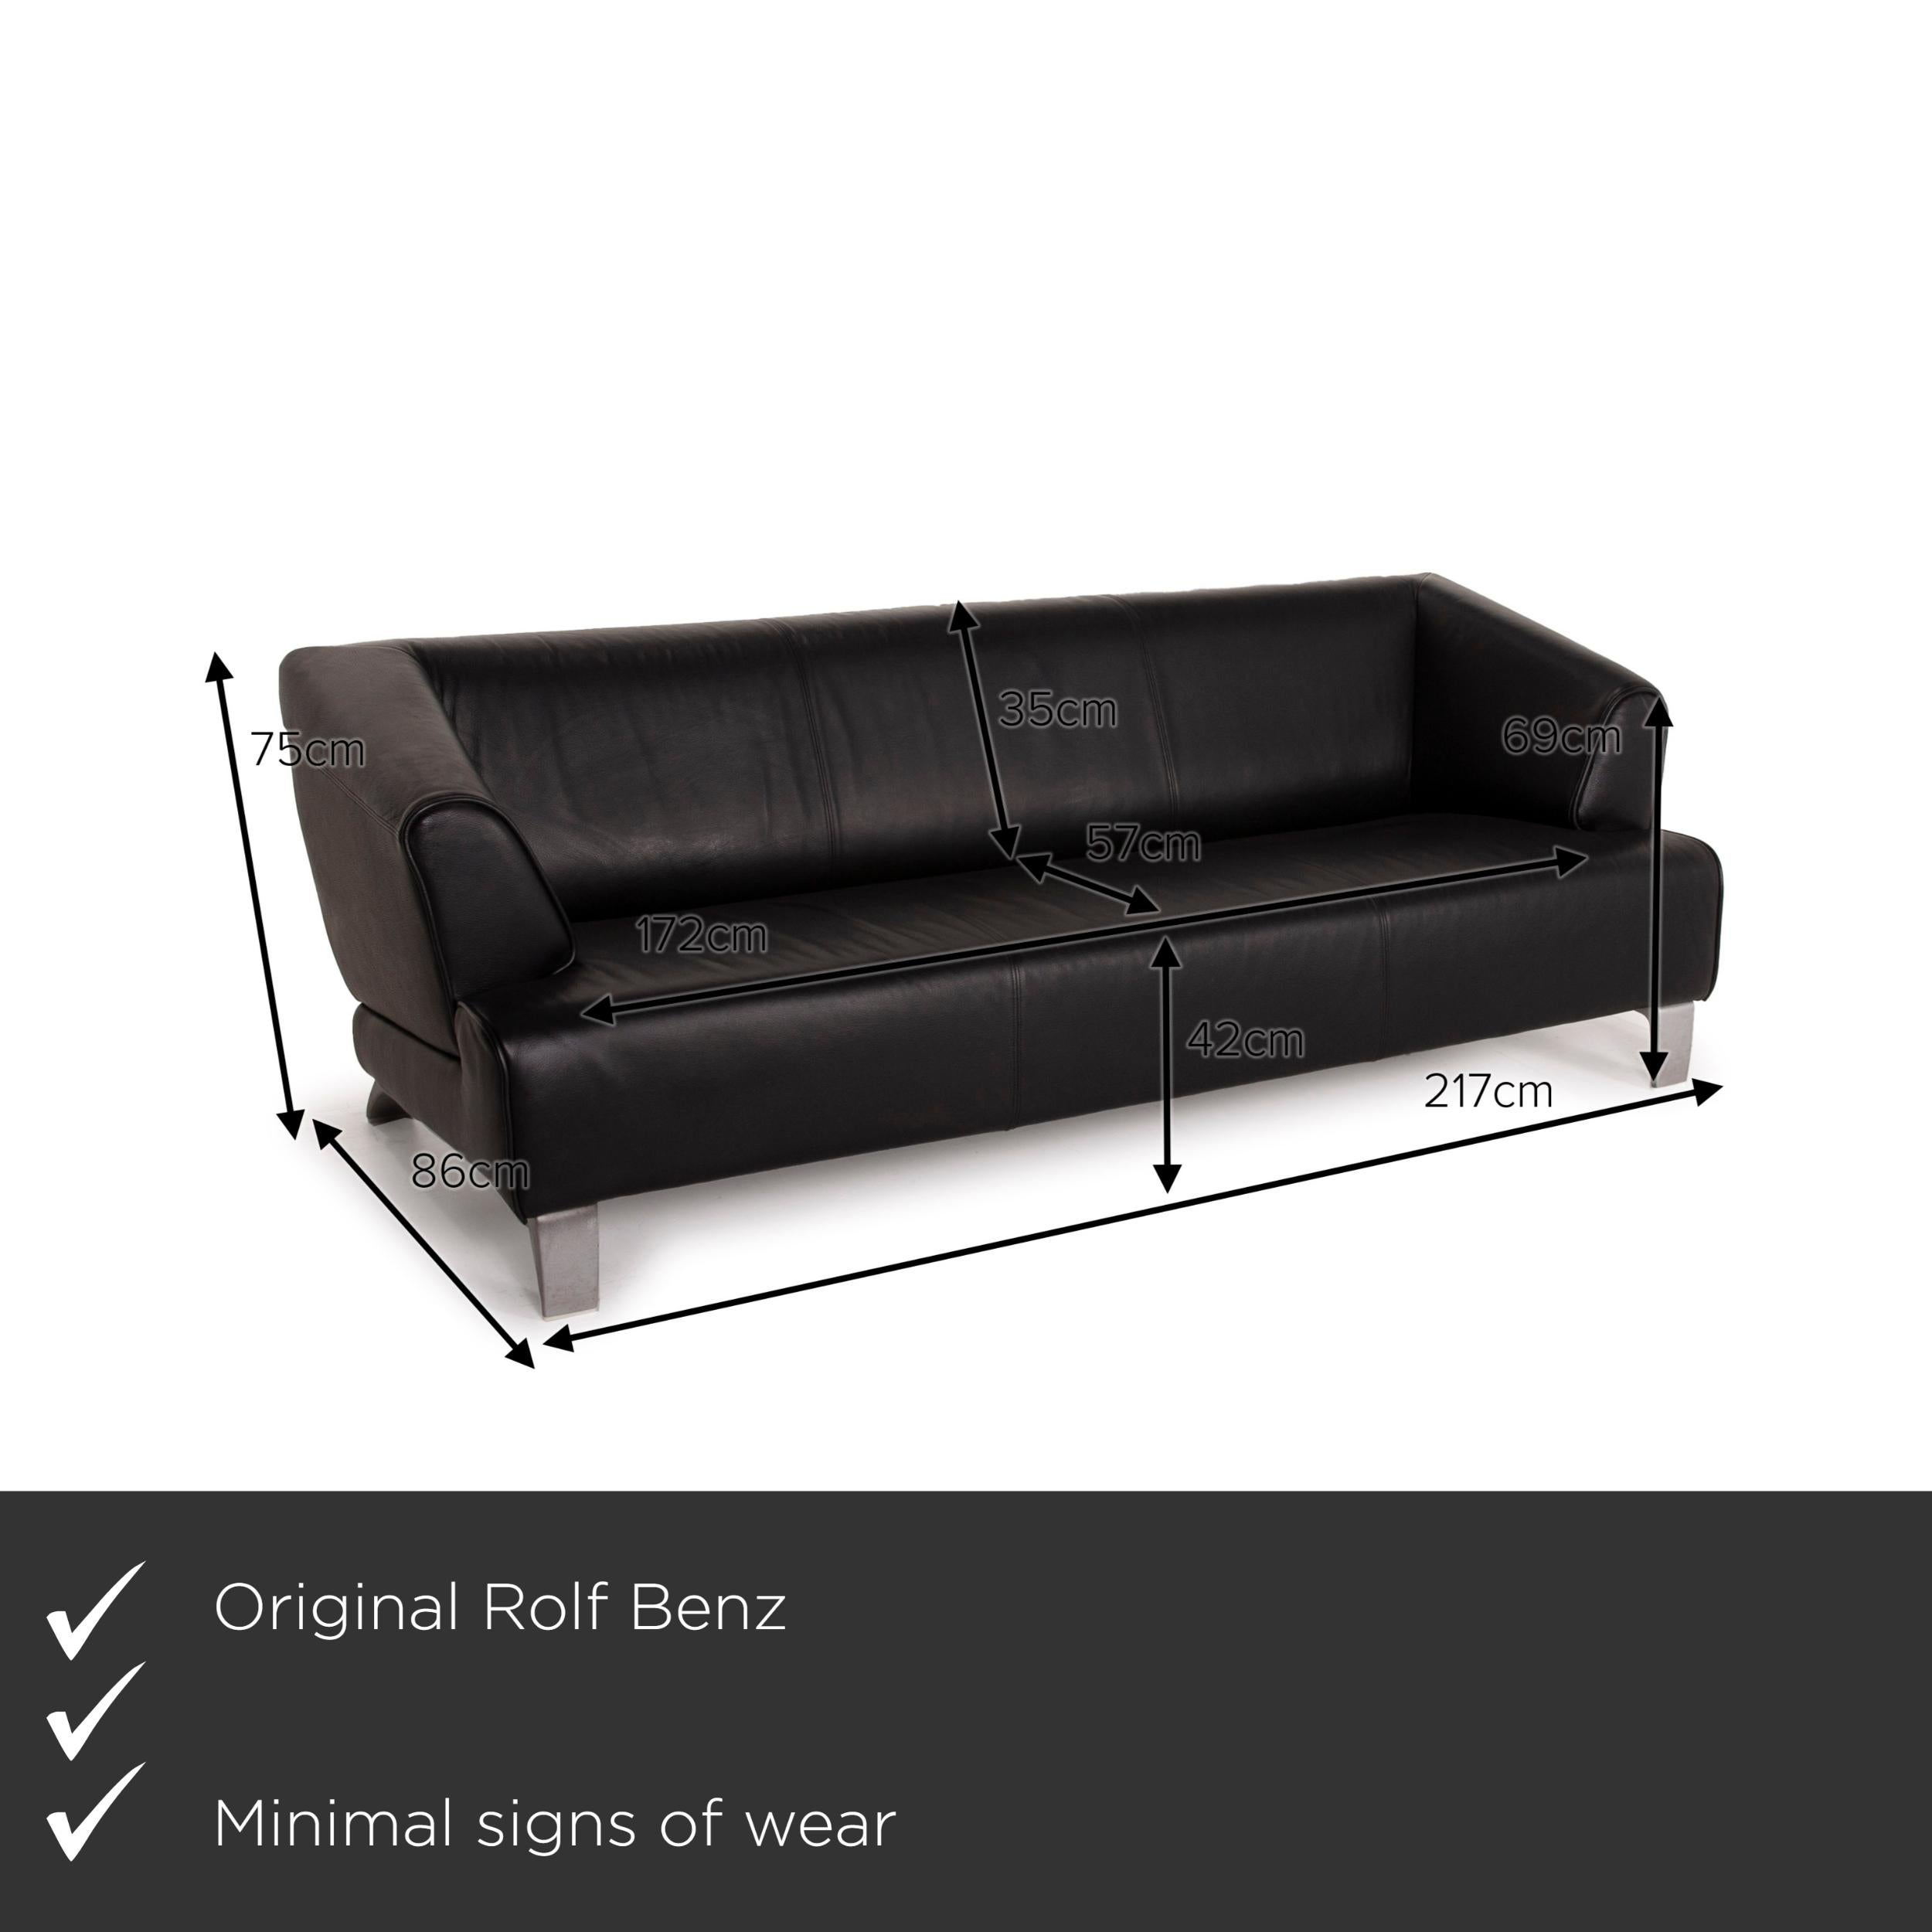 We present to you a Rolf Benz 2300 leather sofa black three-seater.
  
 

 Product measurements in centimeters:
 

Depth: 86
Width: 217
Height: 75
Seat height: 42
Rest height: 69
Seat depth: 57
Seat width: 172
Back height: 35.